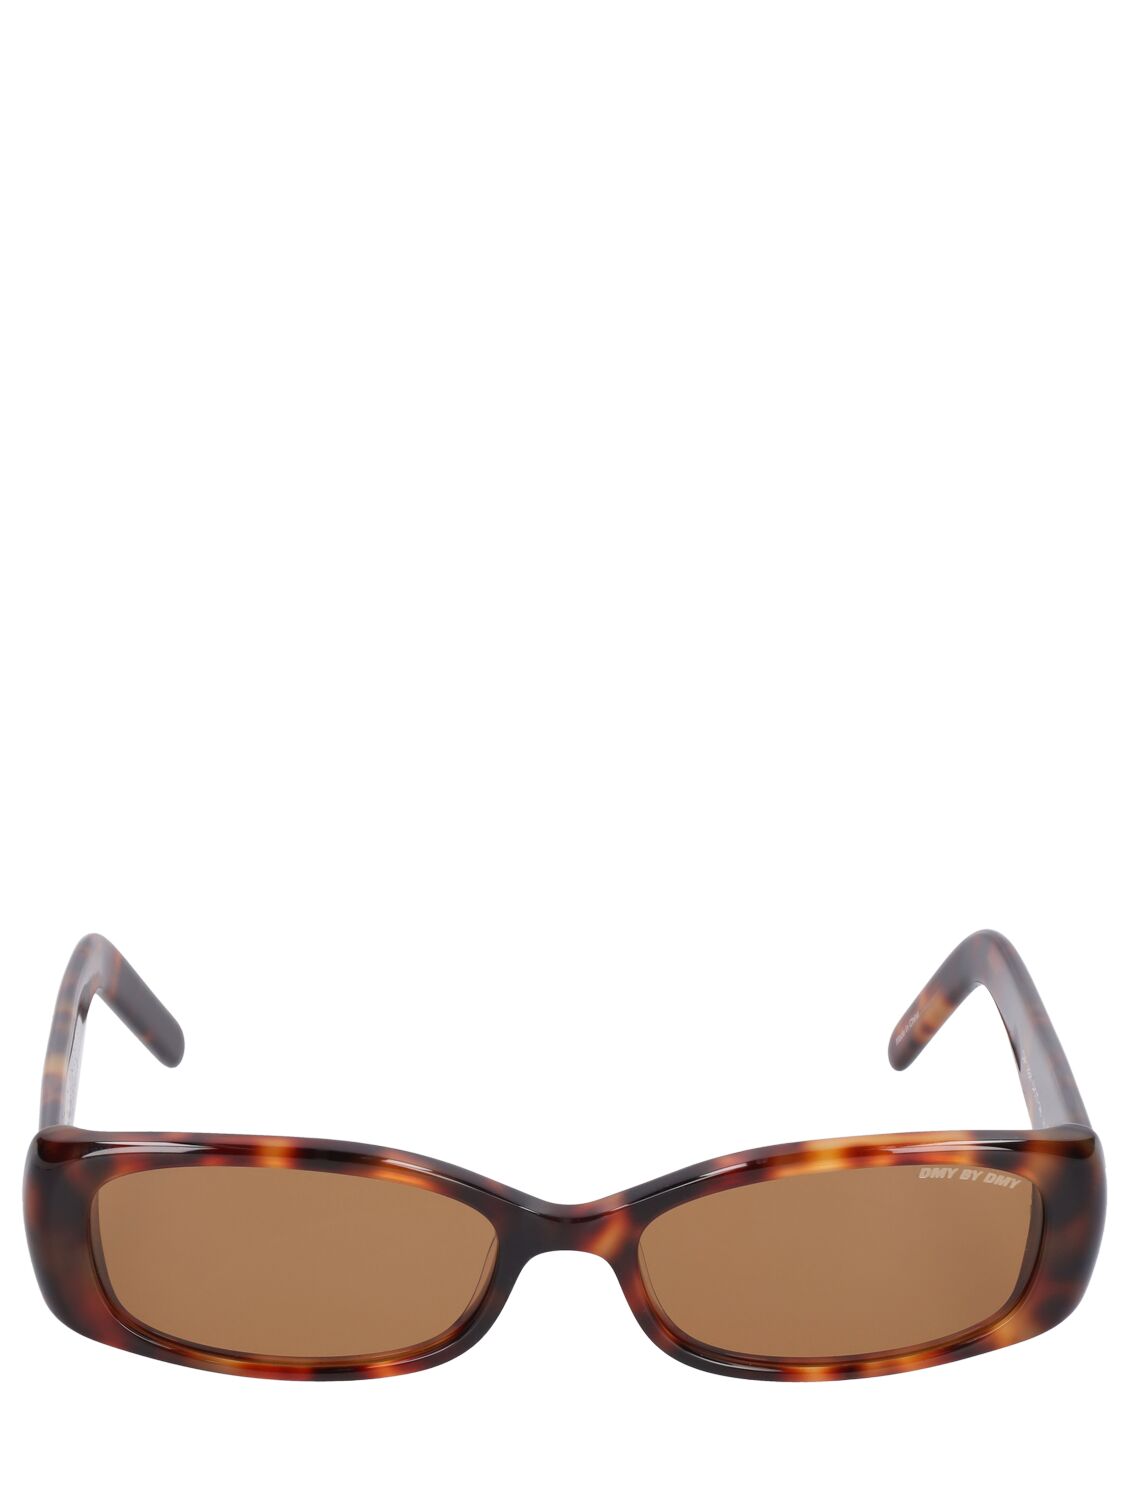 Image of Billy Squared Acetate Sunglasses